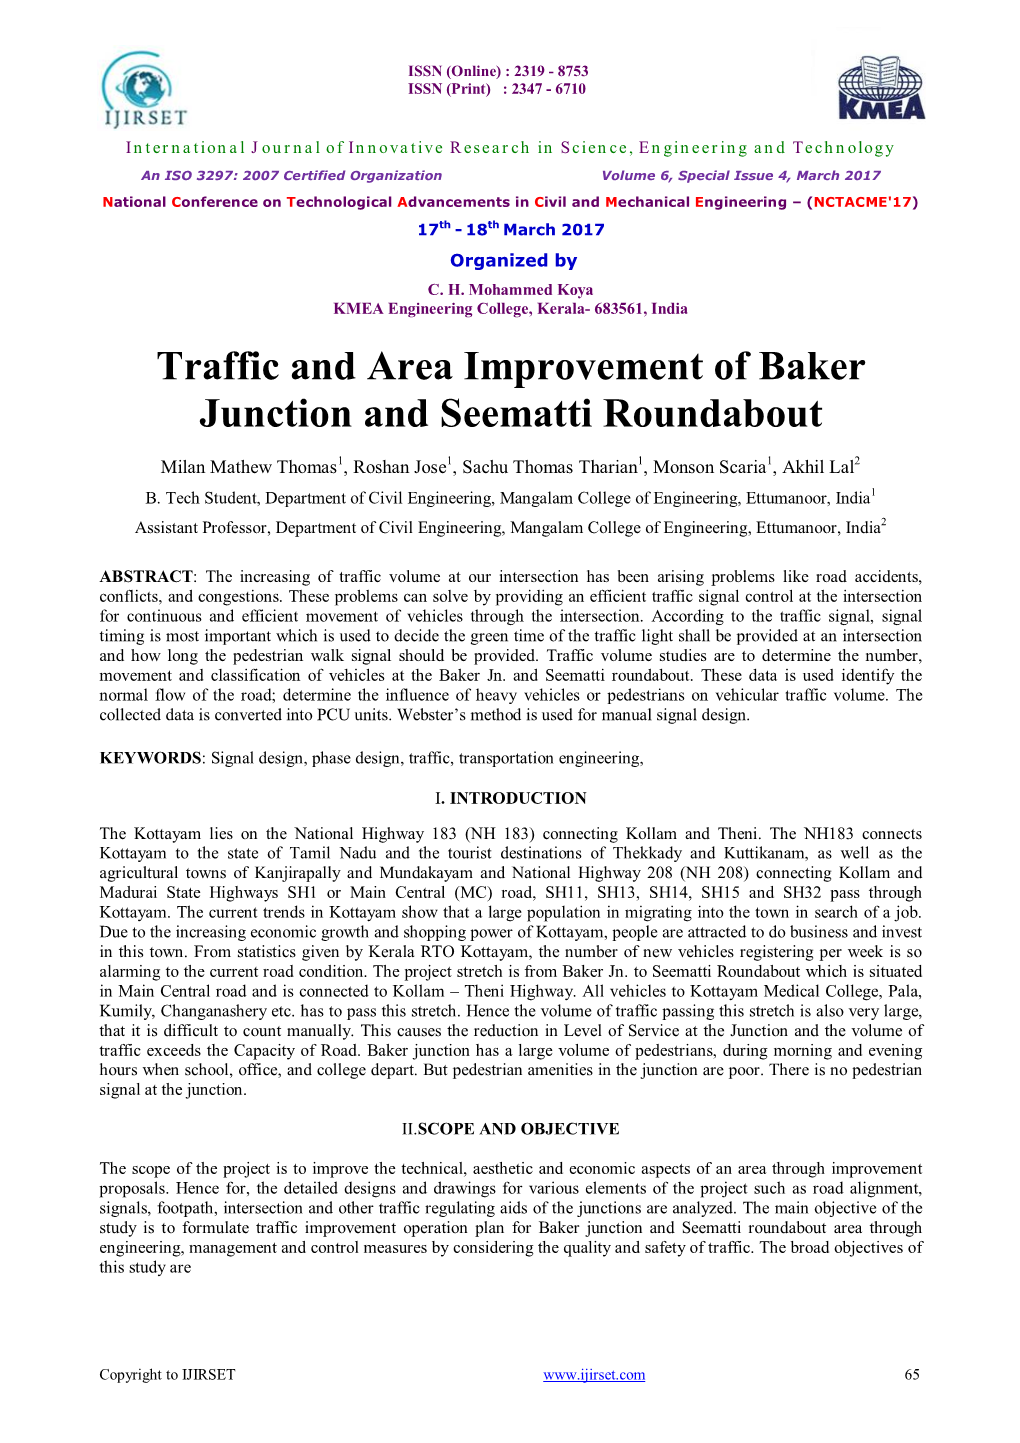 Traffic and Area Improvement of Baker Junction and Seematti Roundabout